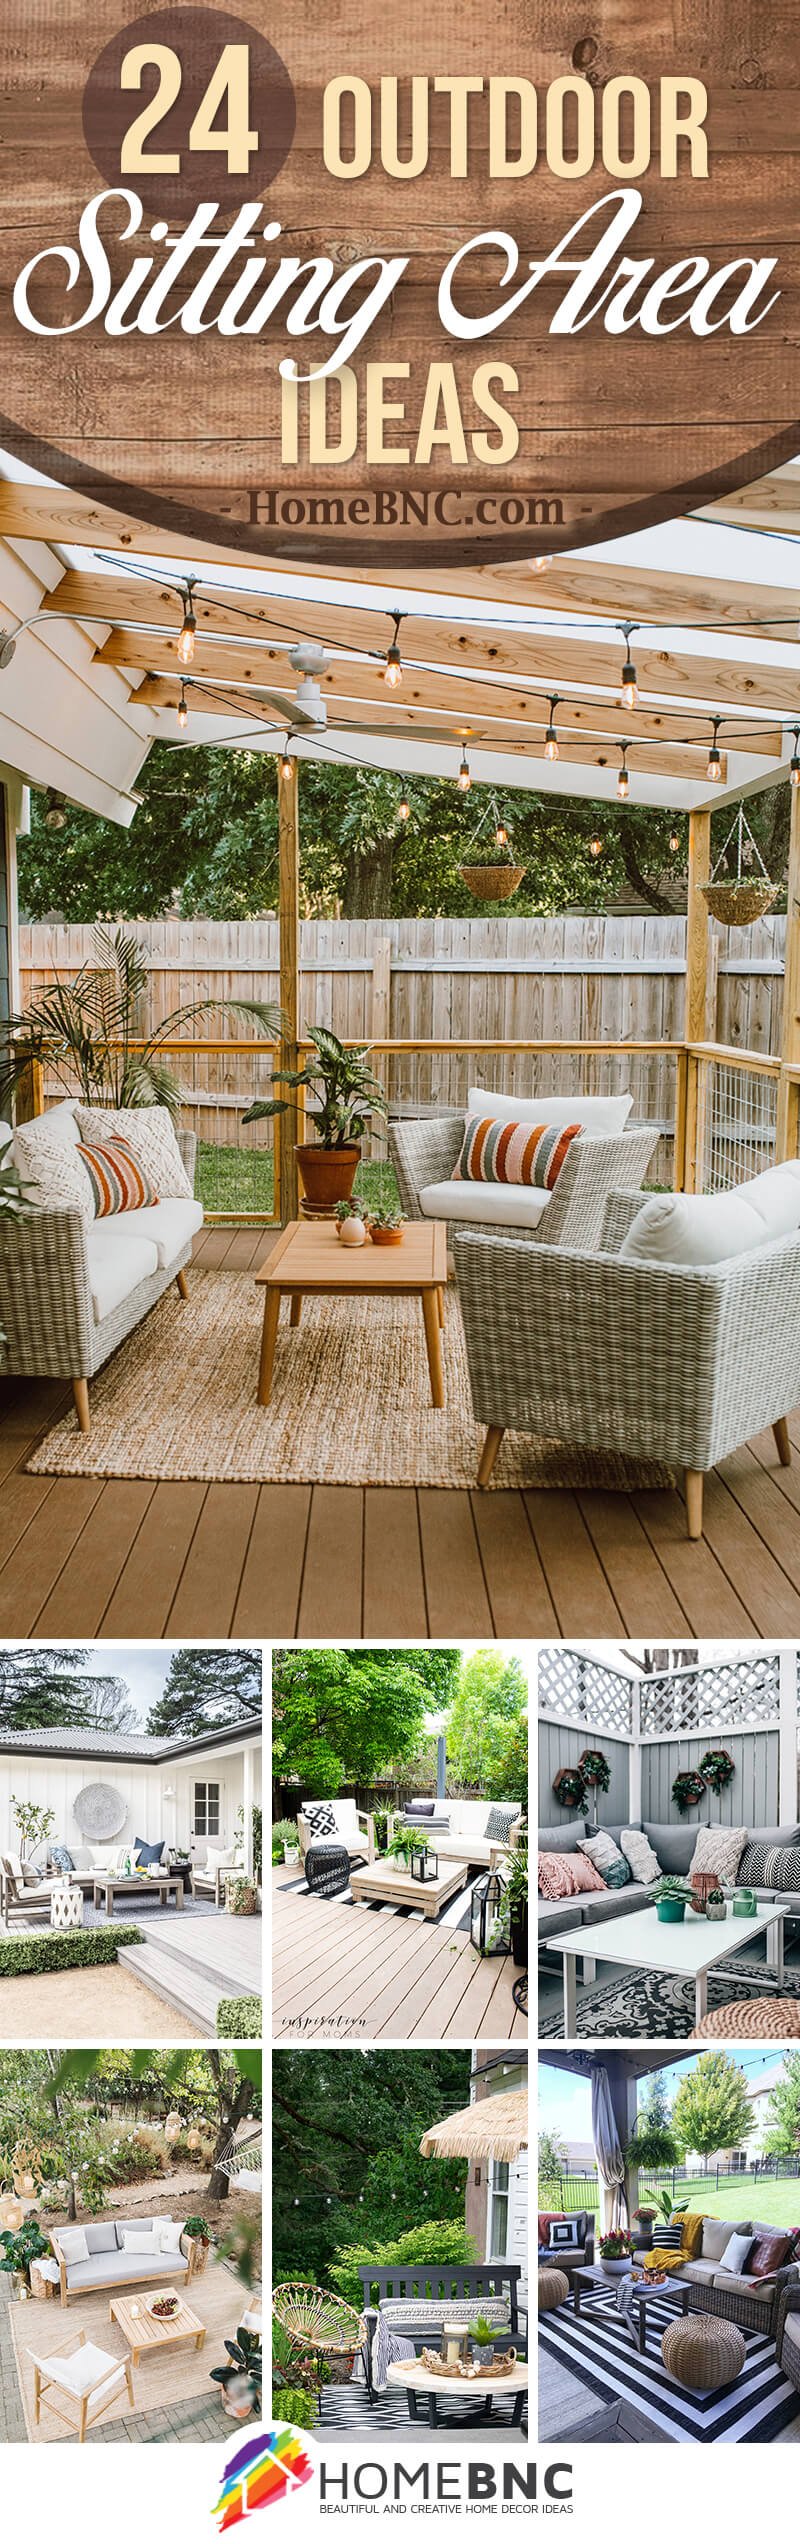 20 Best Outdoor Sitting Area Ideas to Bring Your Space Together in ...